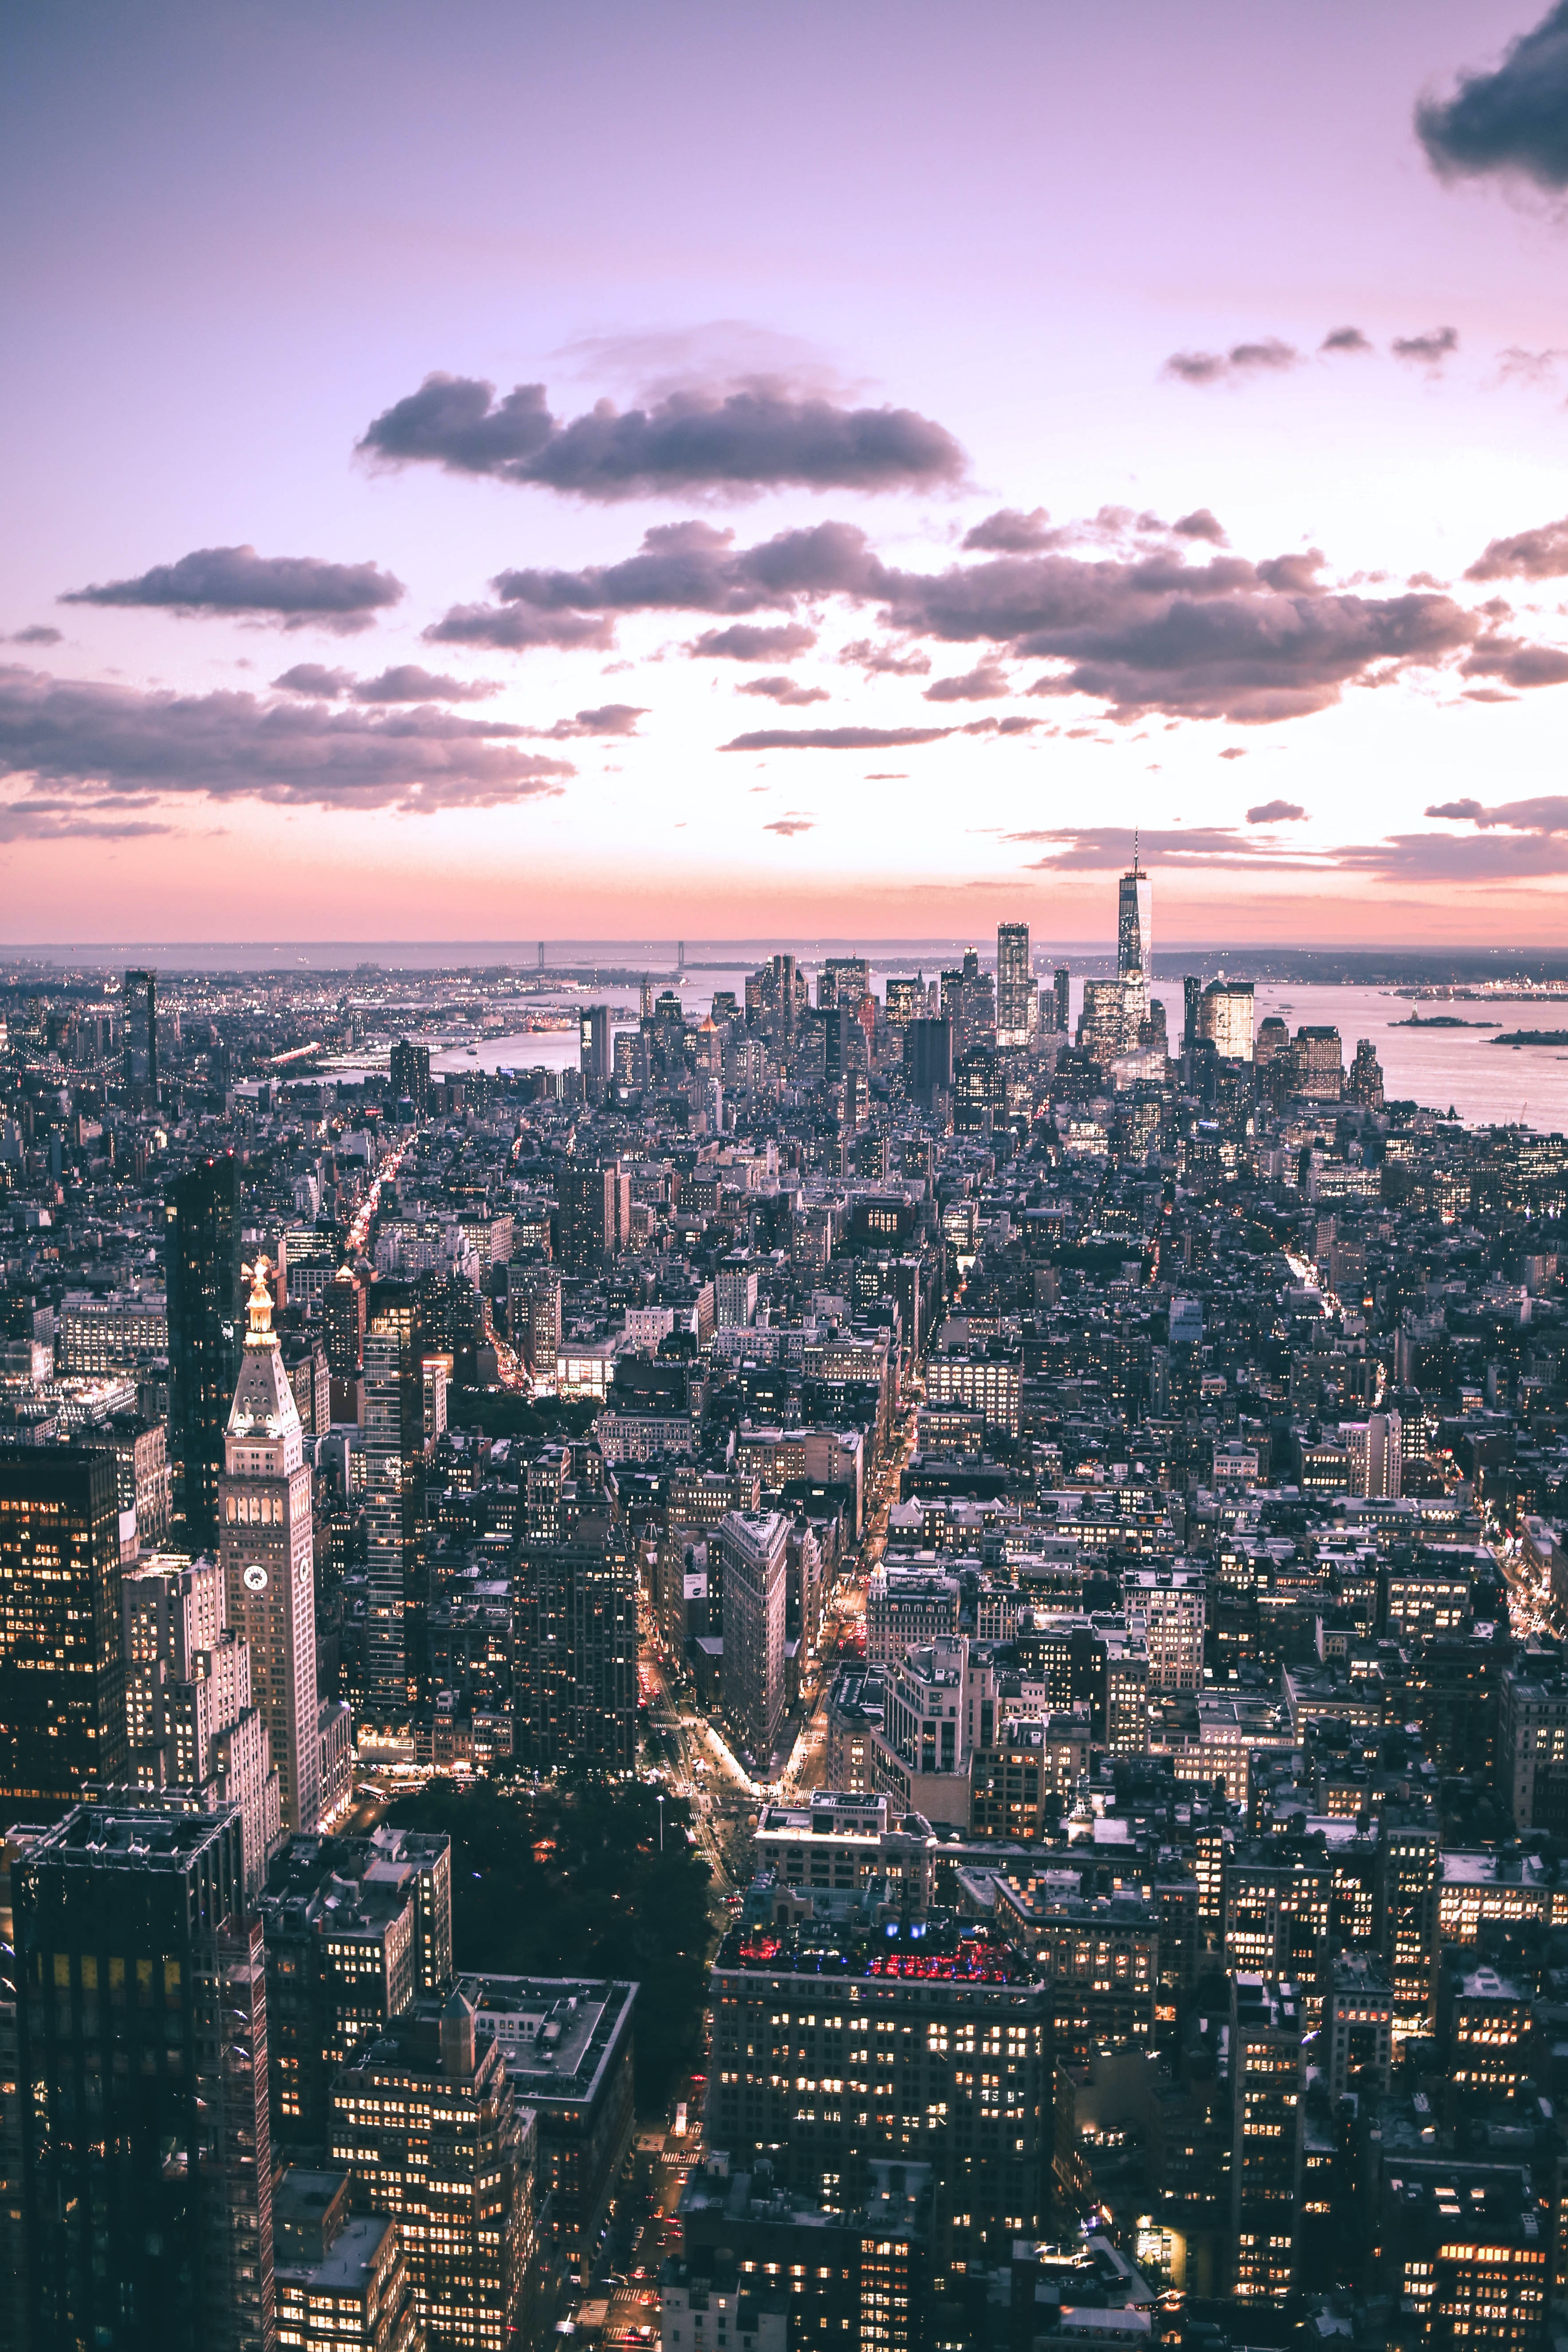 cities, city, building, view from above, megapolis, megalopolis, urban landscape, cityscape, new york